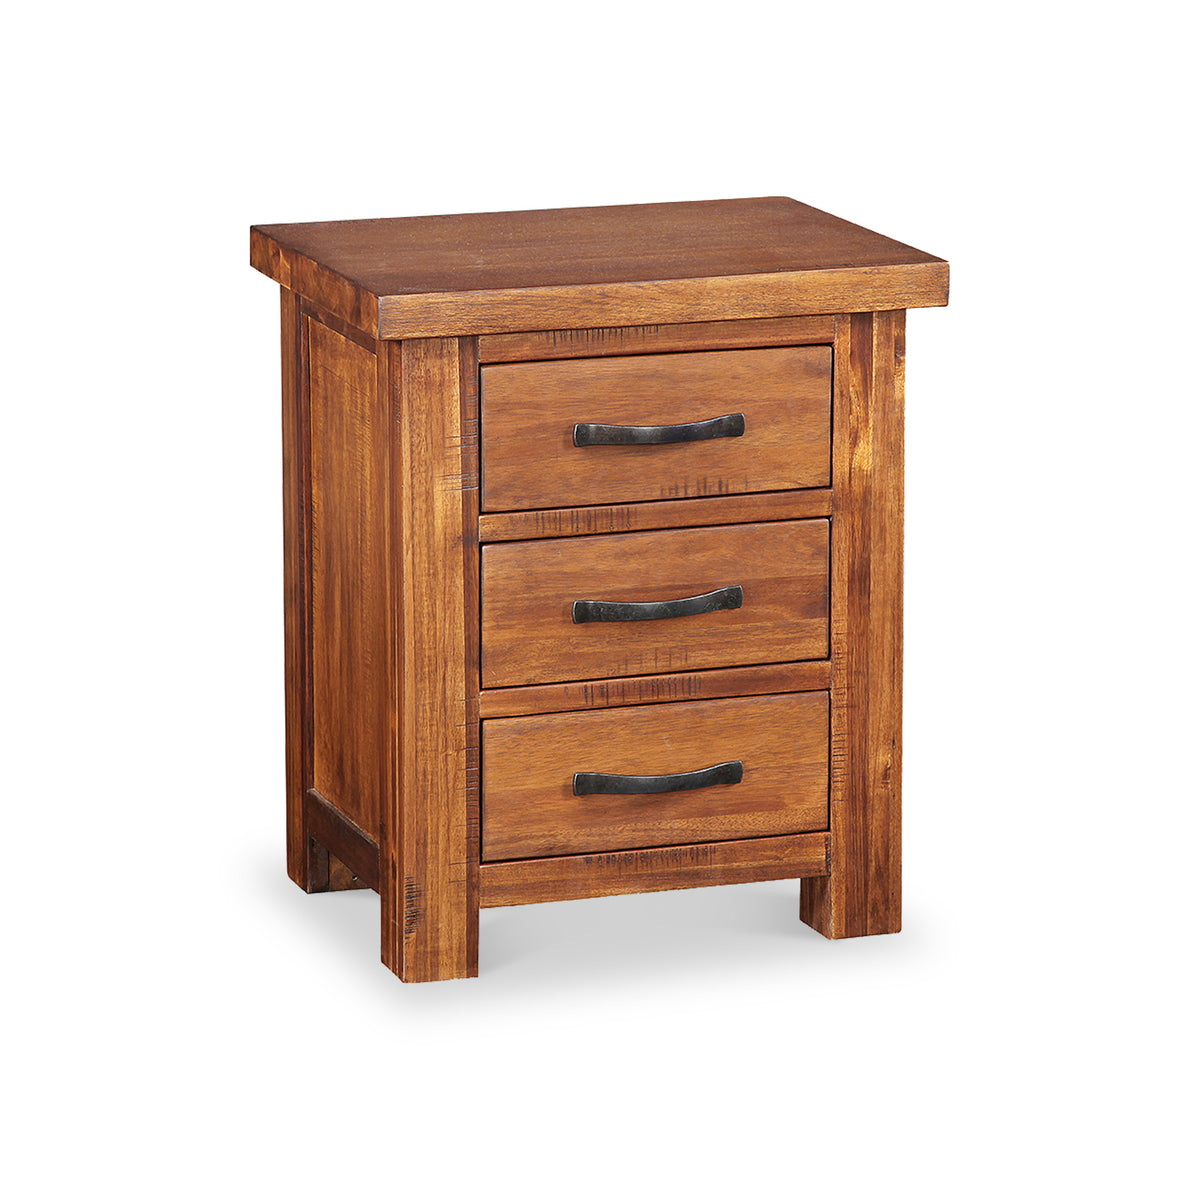 Ladock 3 Drawer Bedside Table from Roseland Furniture